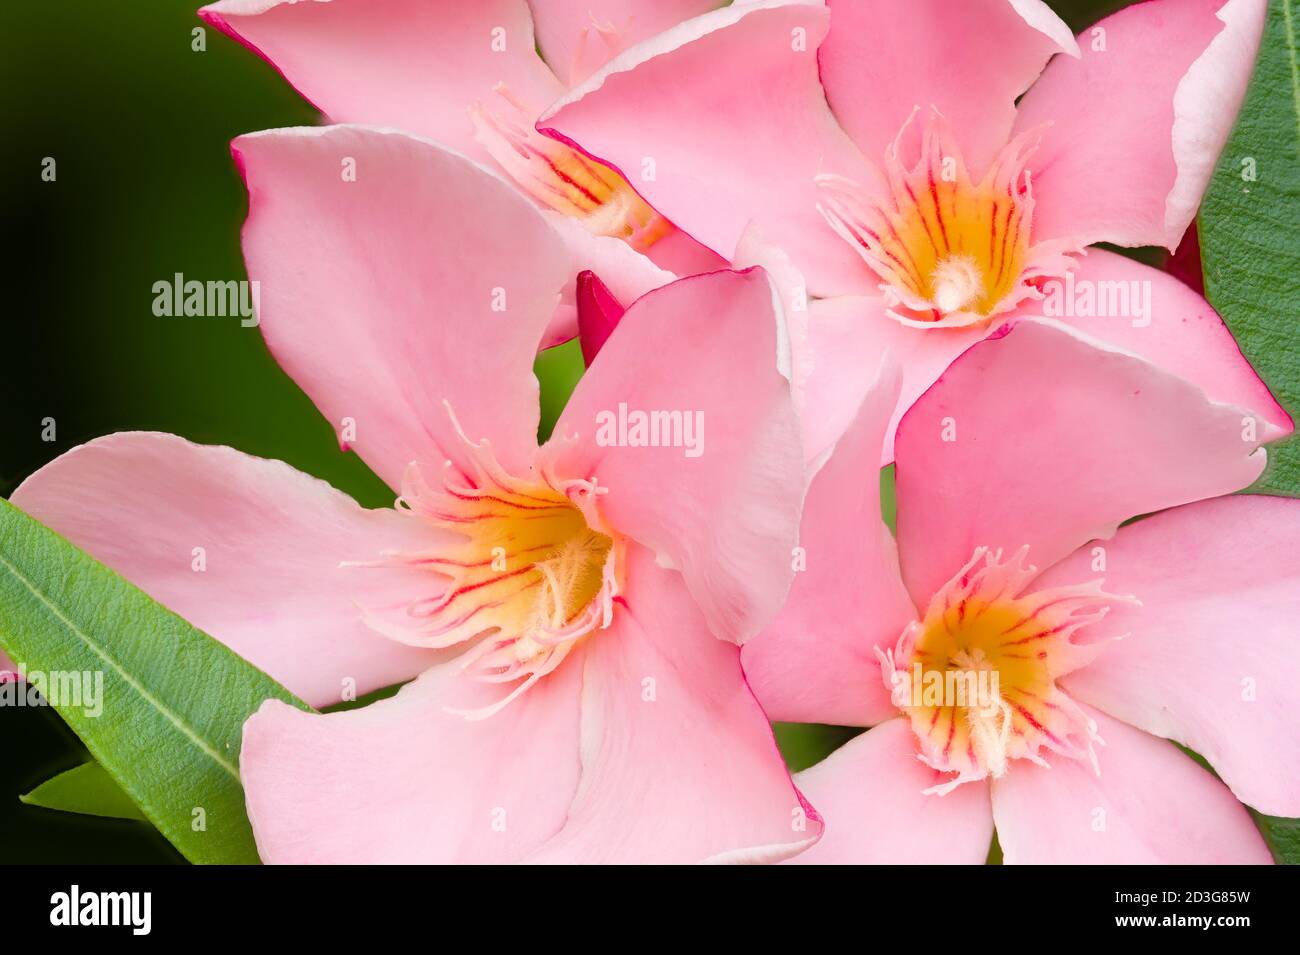 Nerium oleander, evergreen shrub or small tree in the dogbane family Apocynaceae, toxic in all its parts. Stock Photo